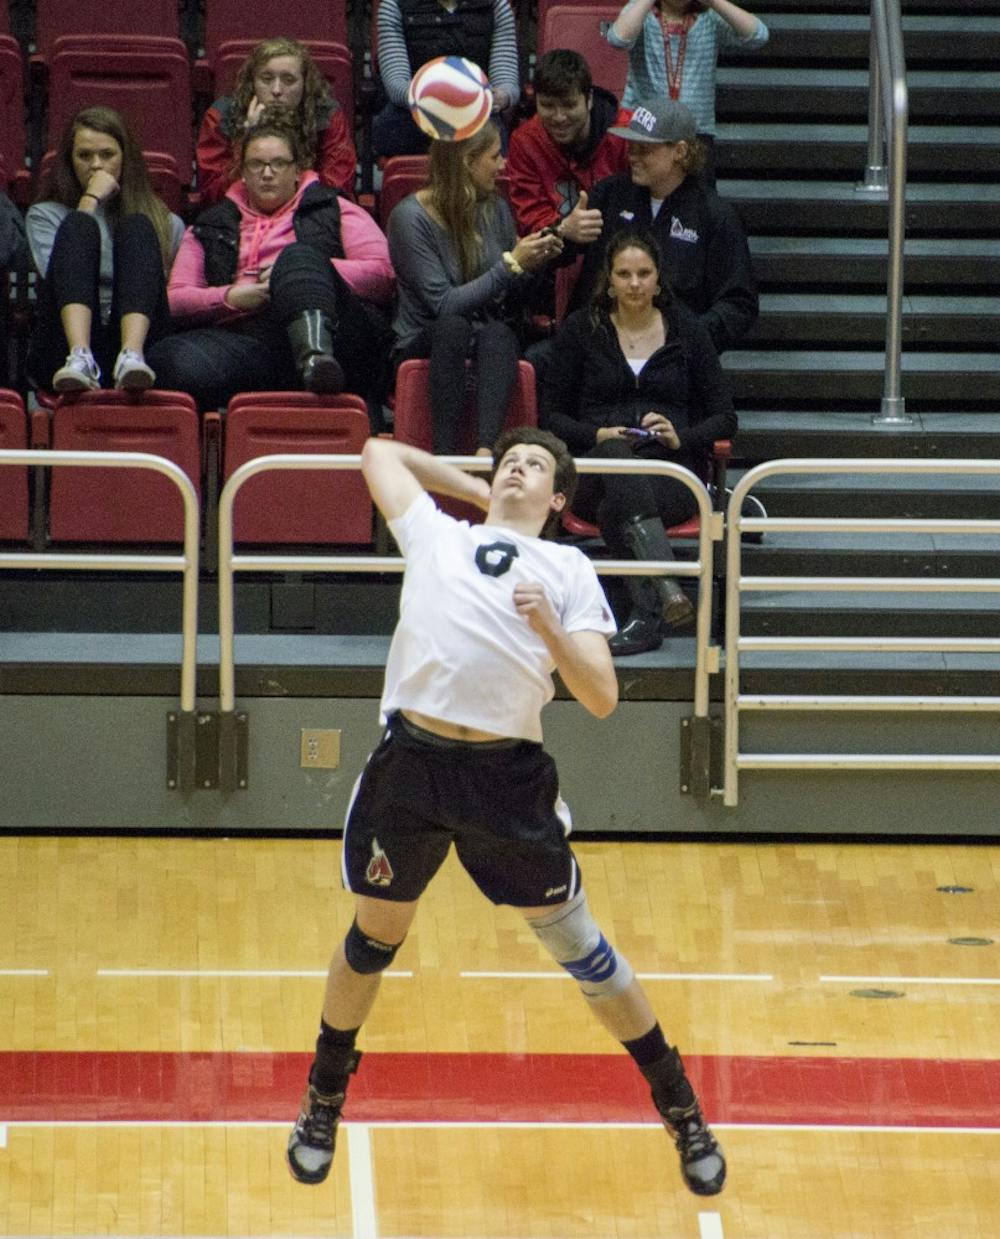 Sophomore outside attacker Brendan Surane serves the ball during the game against Grand Canyon on March 13 at Worthen Arena. DN PHOTO ALAINA JAYE HALSEY